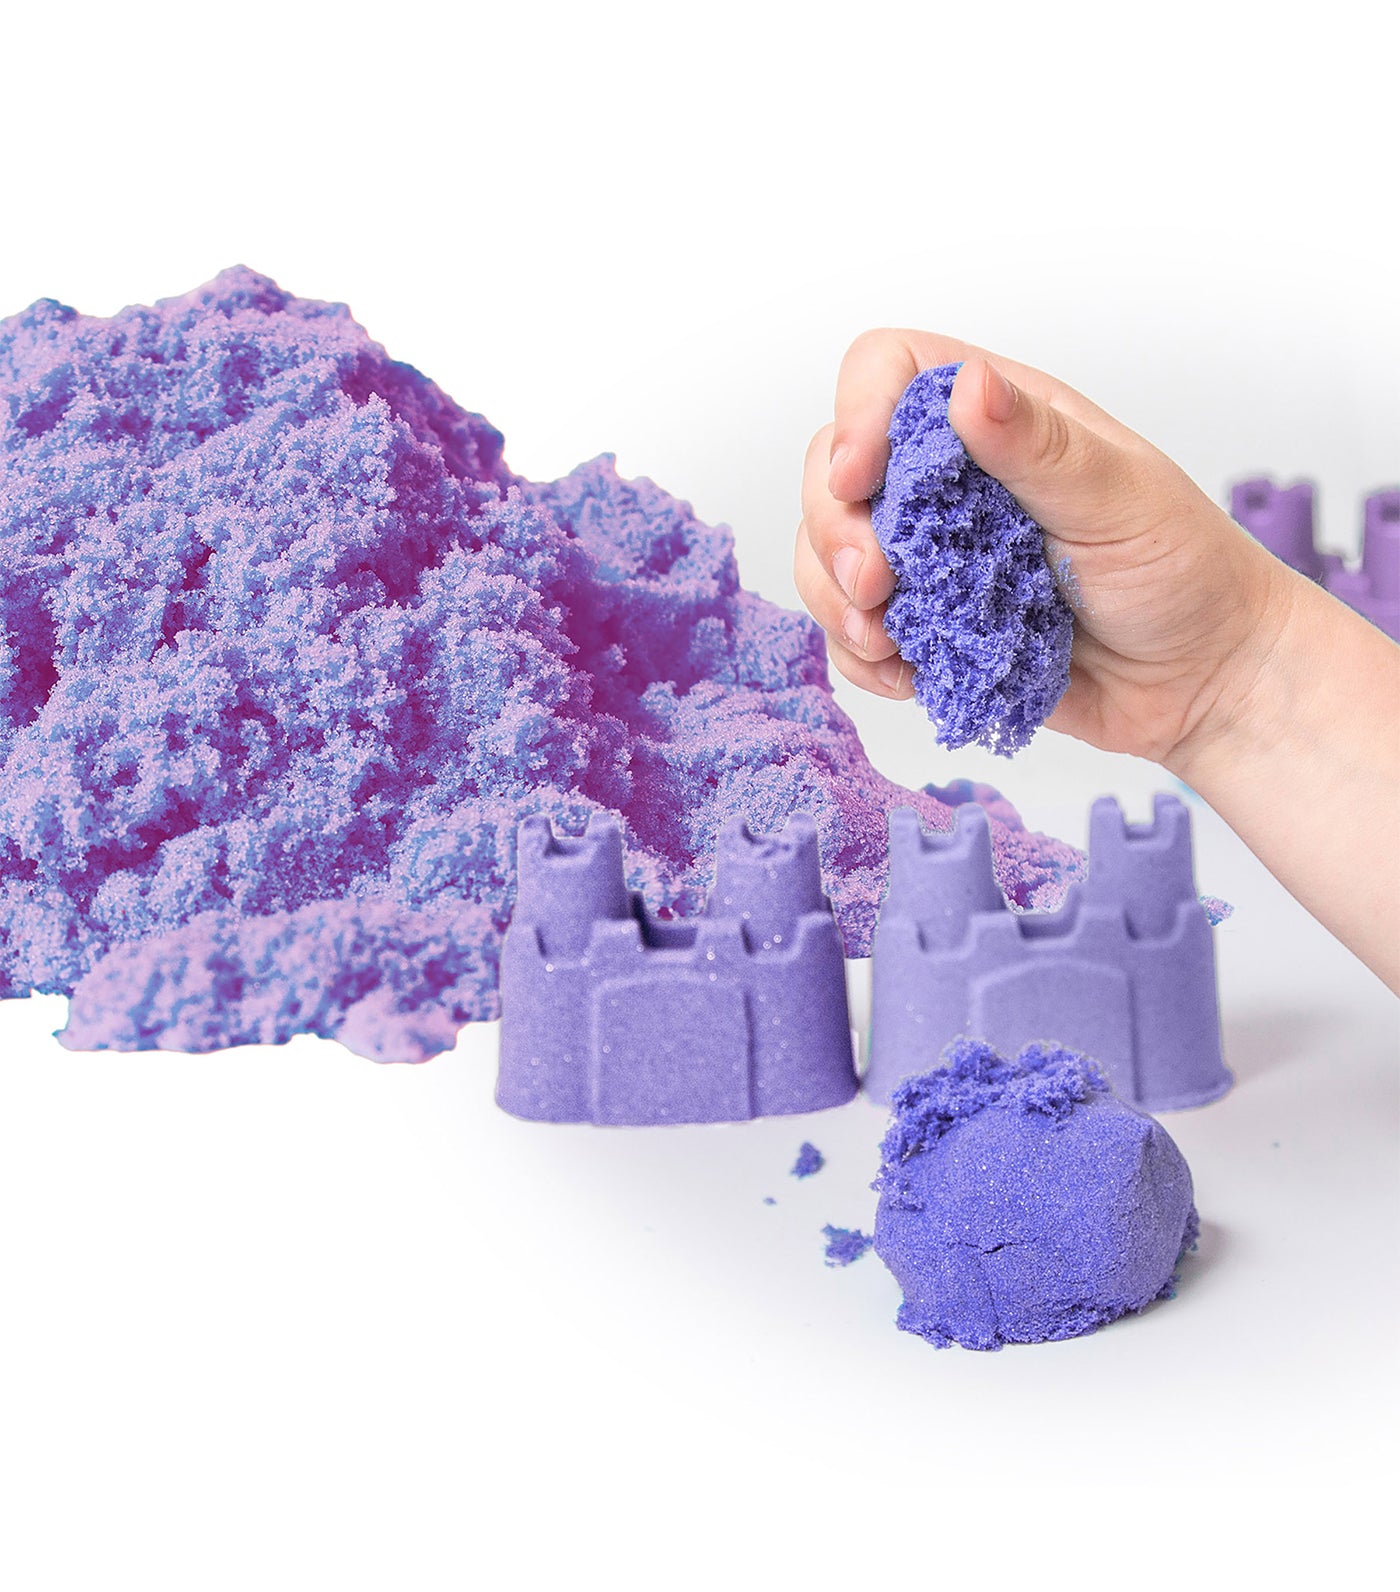 Silly Scents Sand Castle Tub Grapes